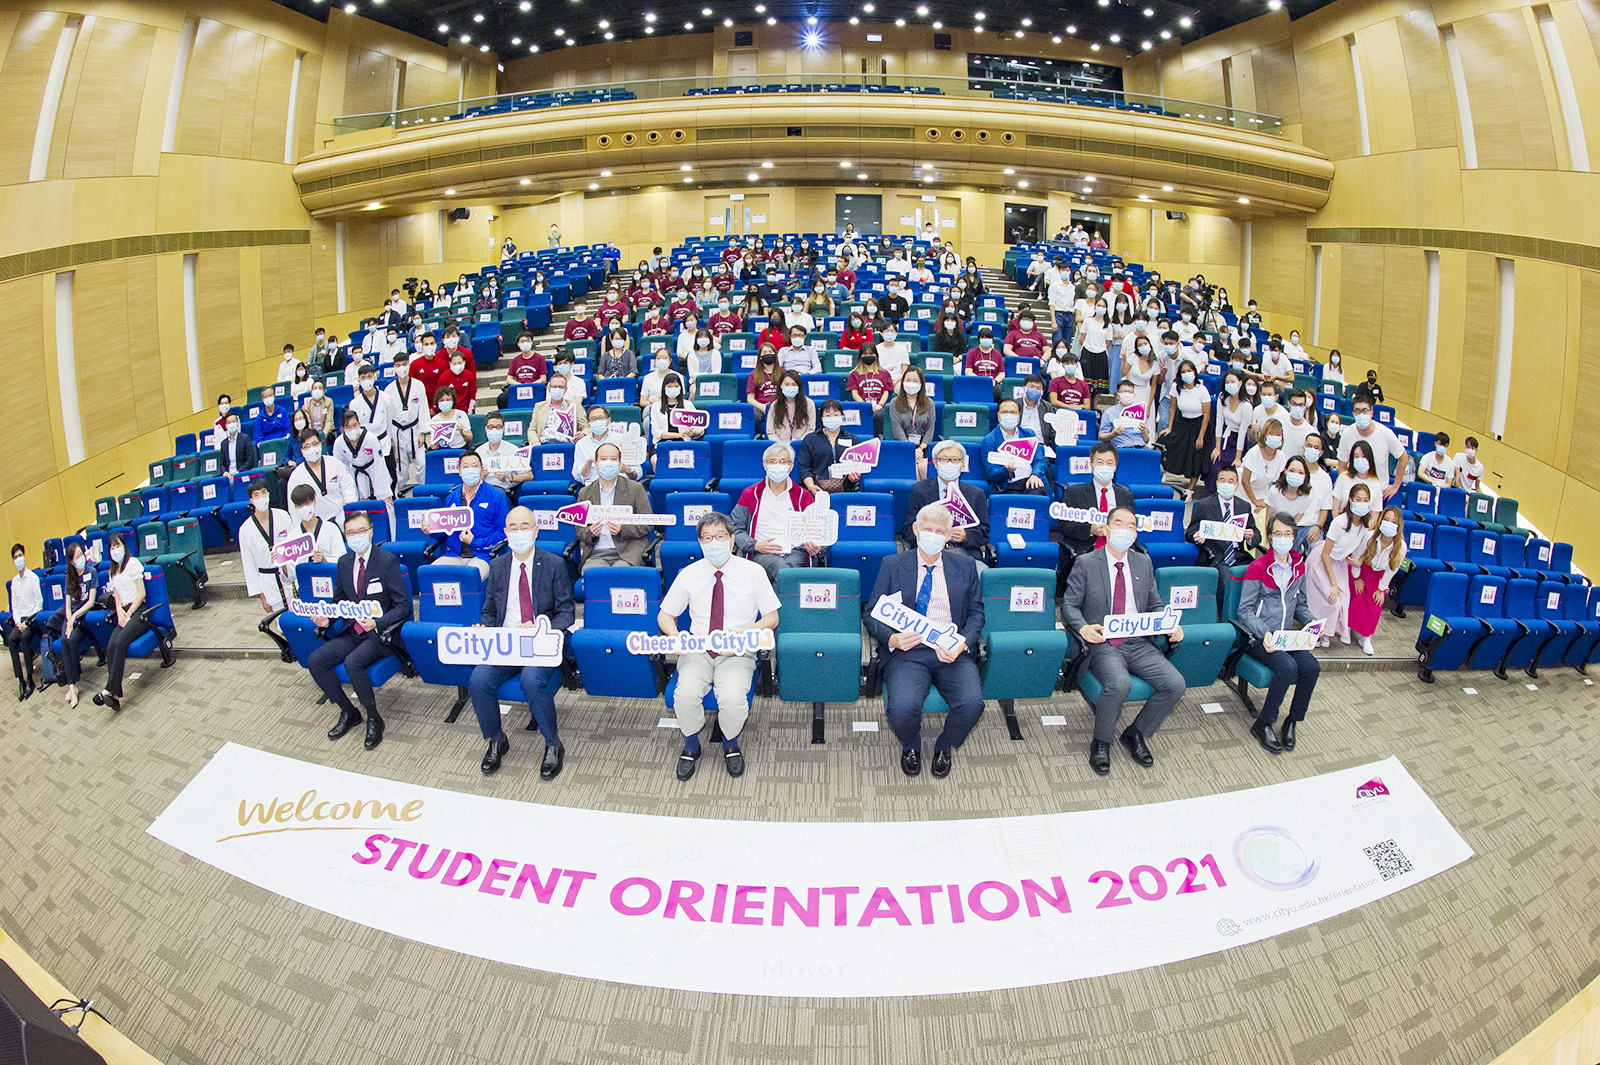 New students were warmly welcomed at the University Welcoming Ceremony.